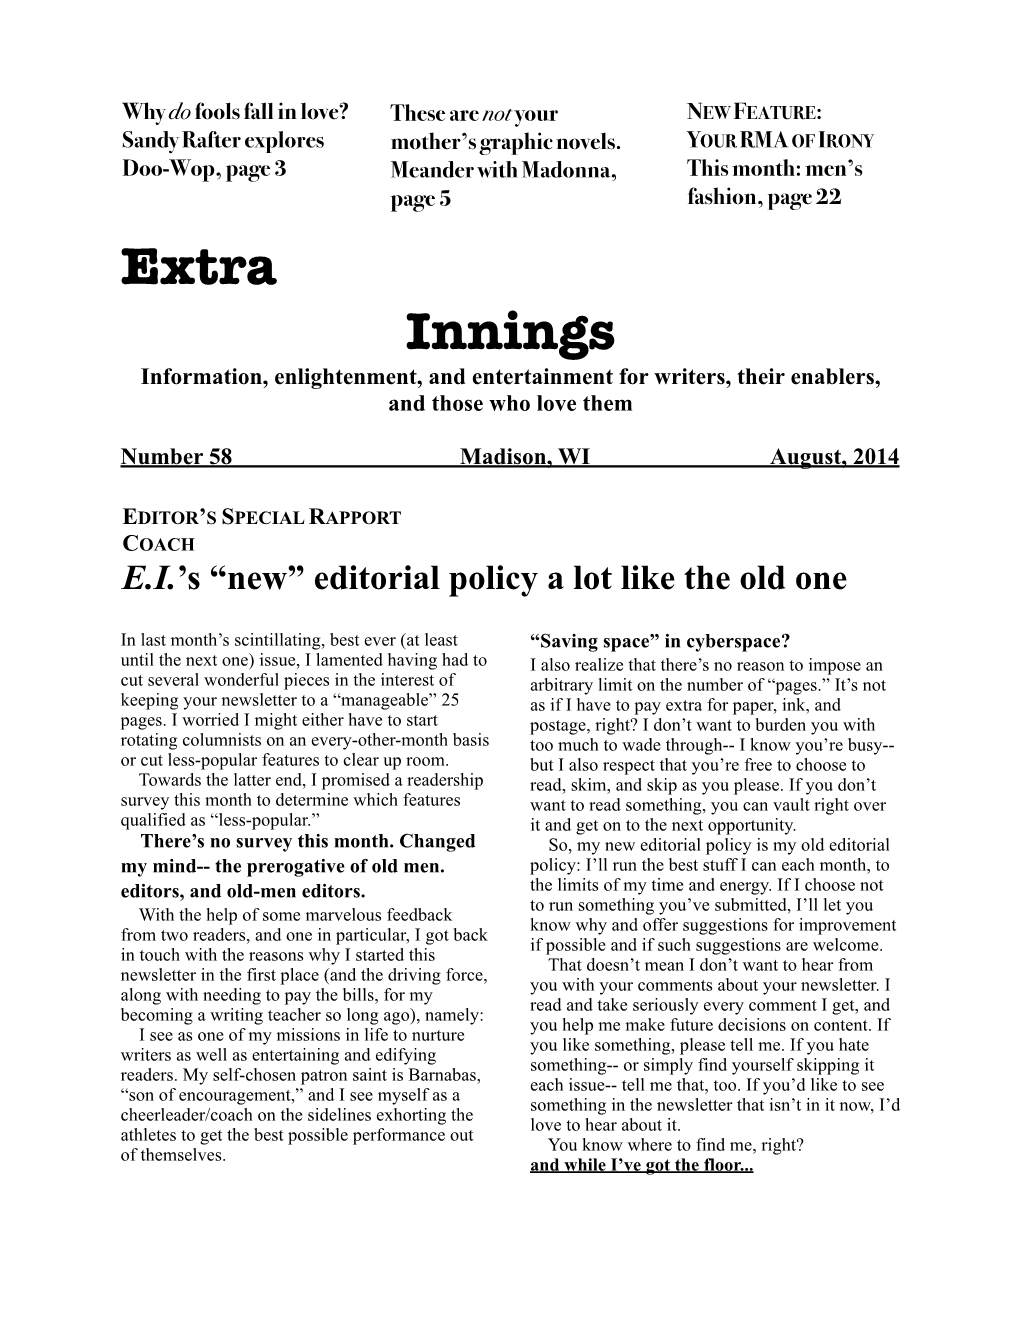 Extra Innings Information, Enlightenment, and Entertainment for Writers, Their Enablers, and Those Who Love Them